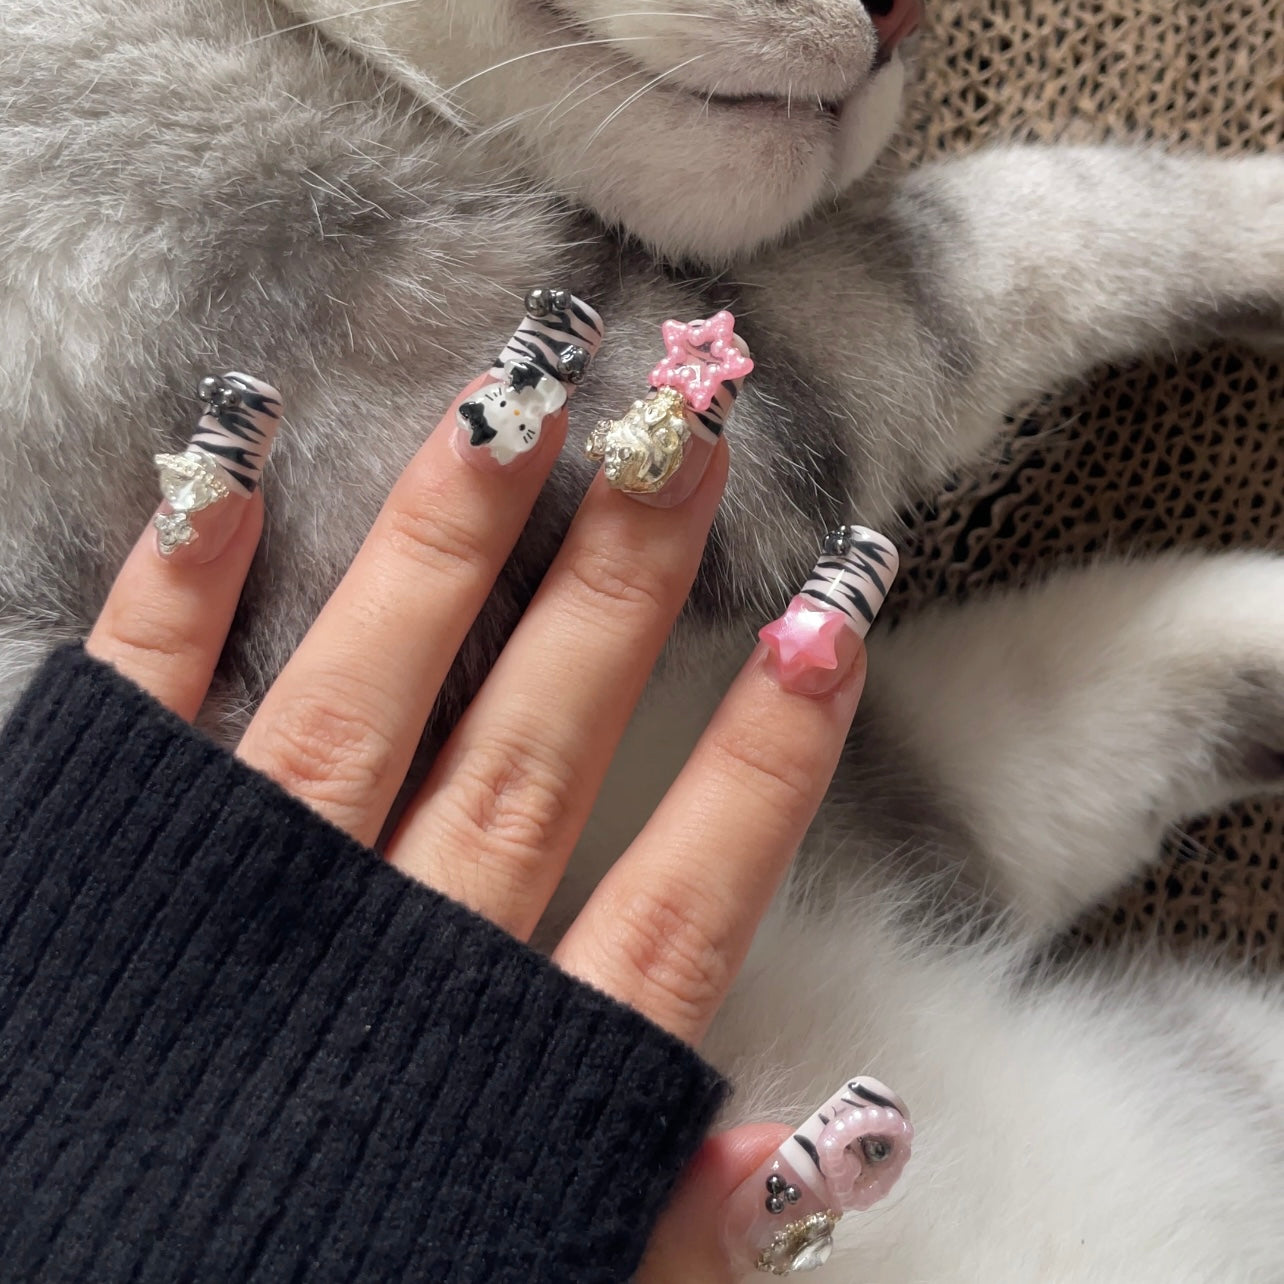 HELLO KITTY - TEN PIECES OF HANDCRAFTED PRESS ON NAIL